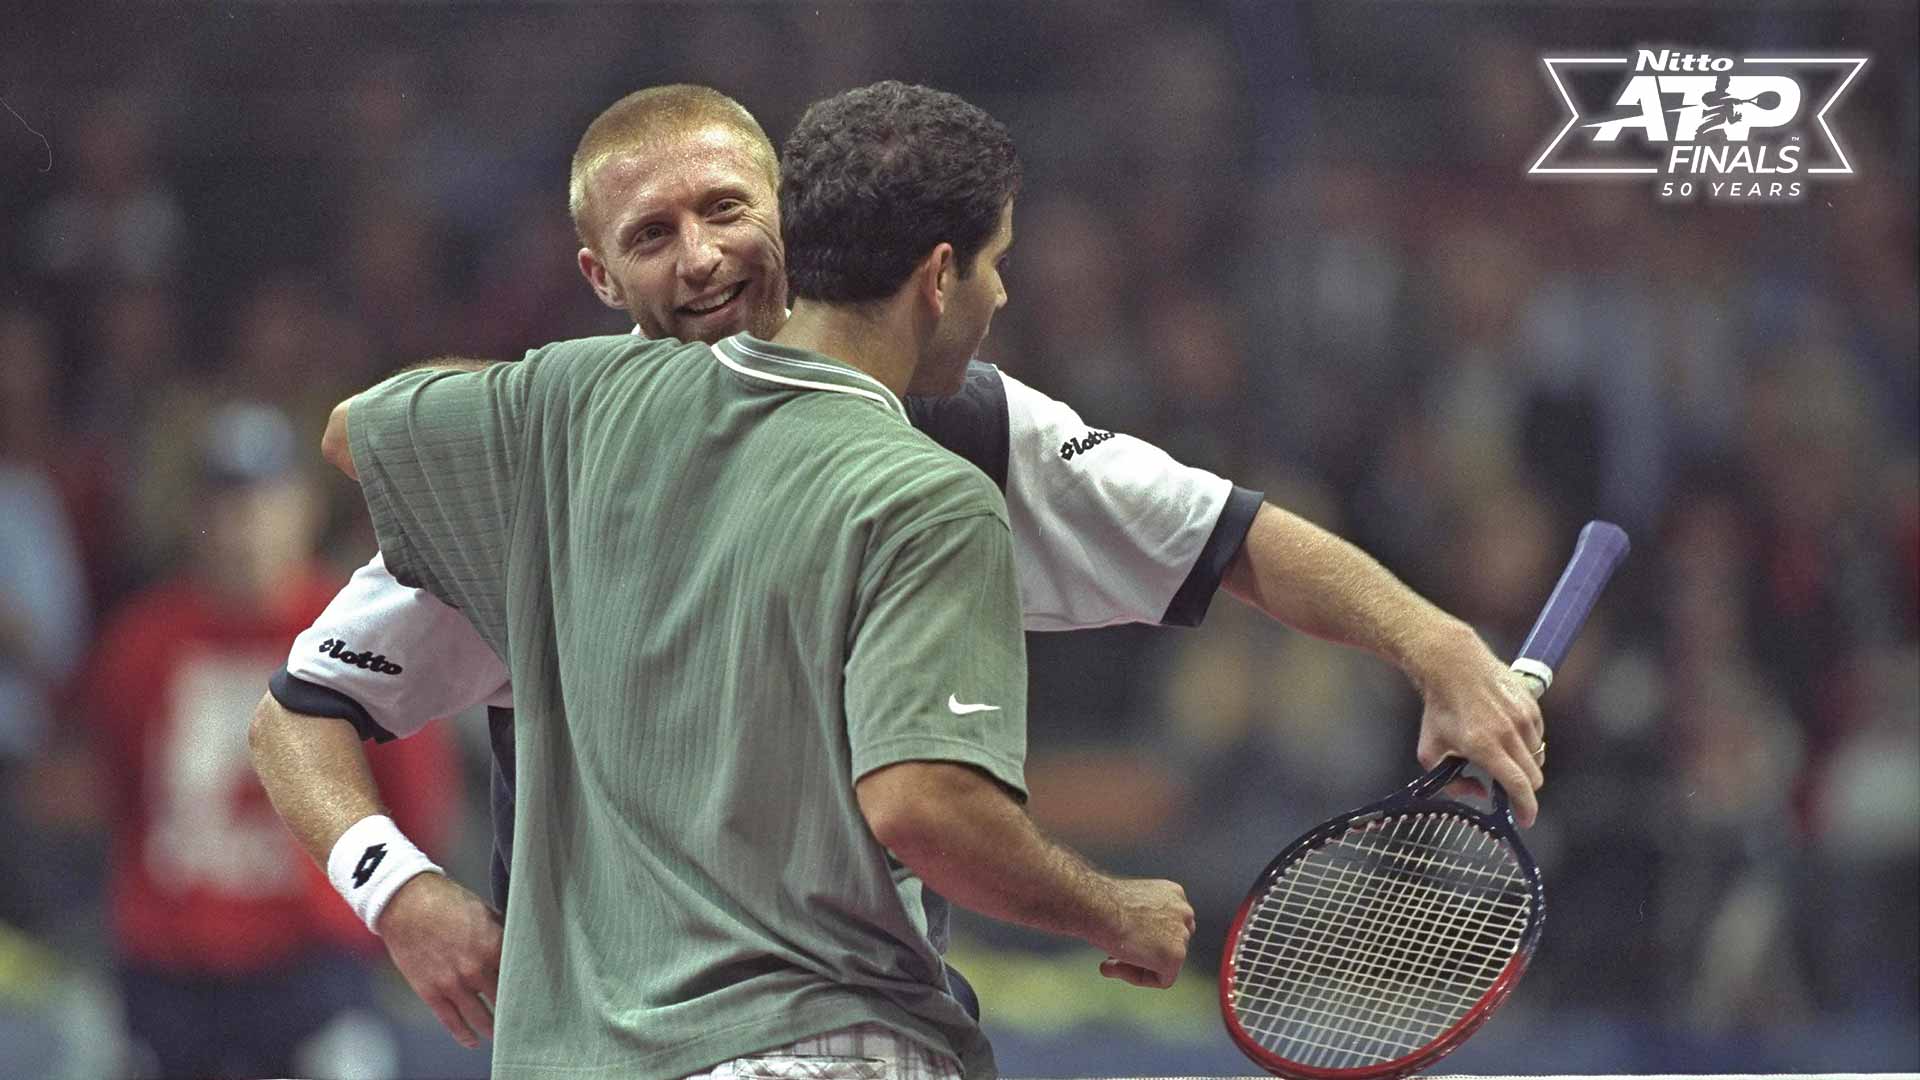 Pete Sampras and Boris Becker embrace after their epic five-set final in 1996 in Hanover.